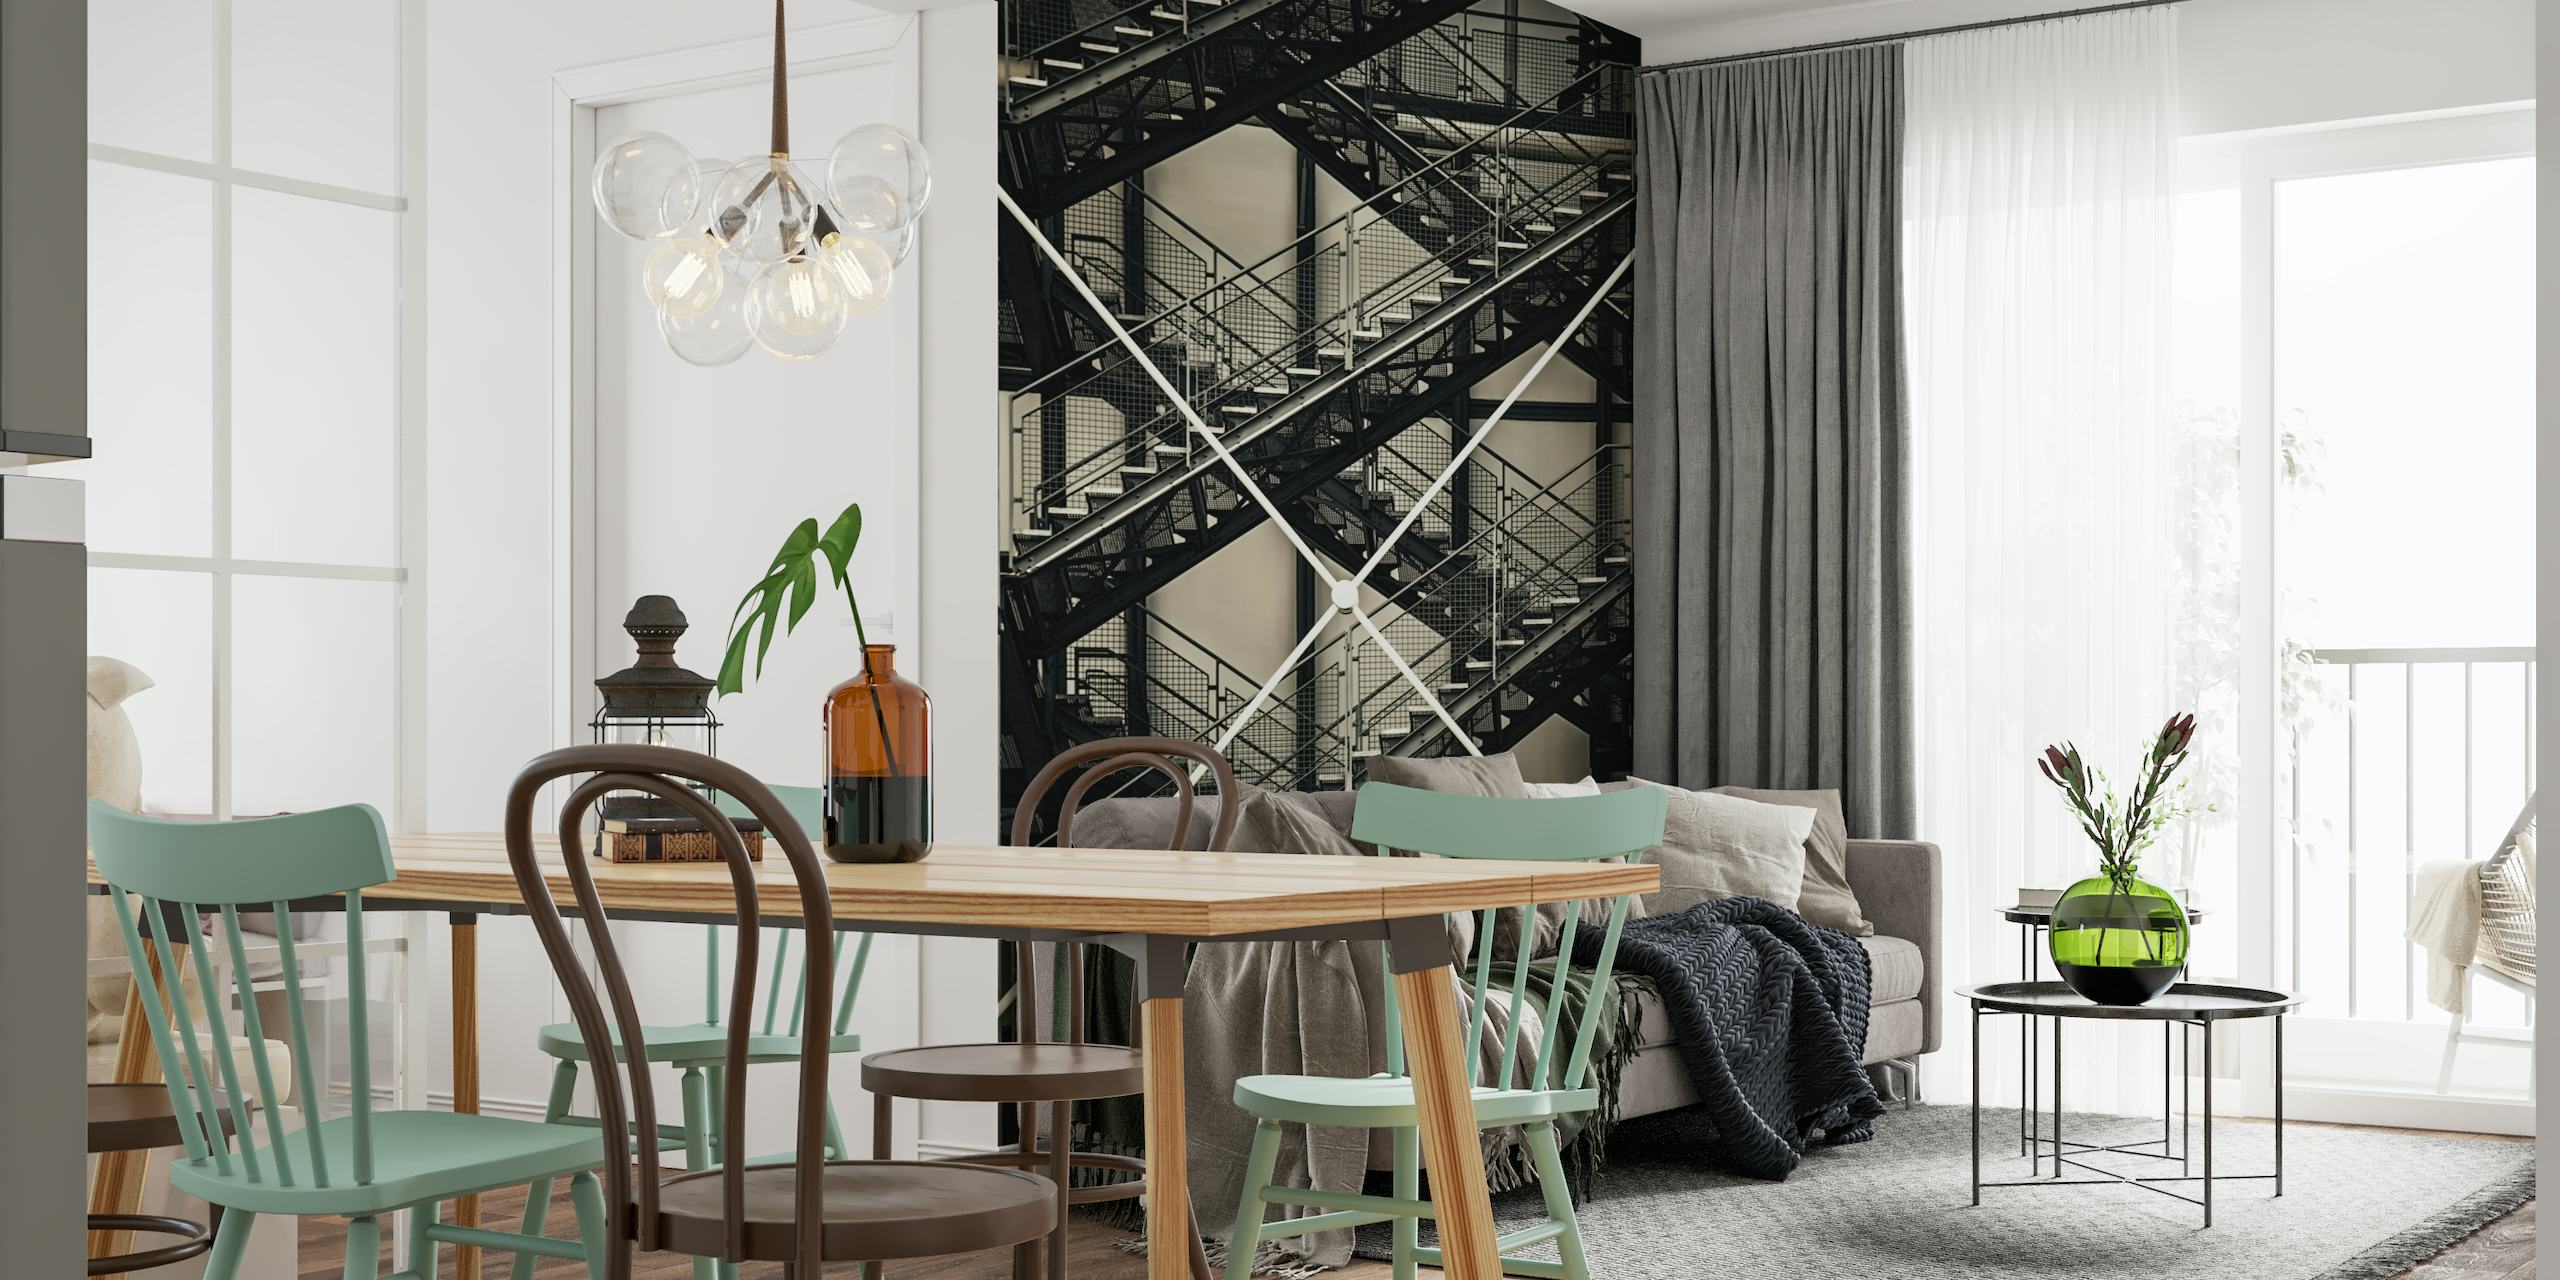 Into The City wall mural with black and white scaffolding design